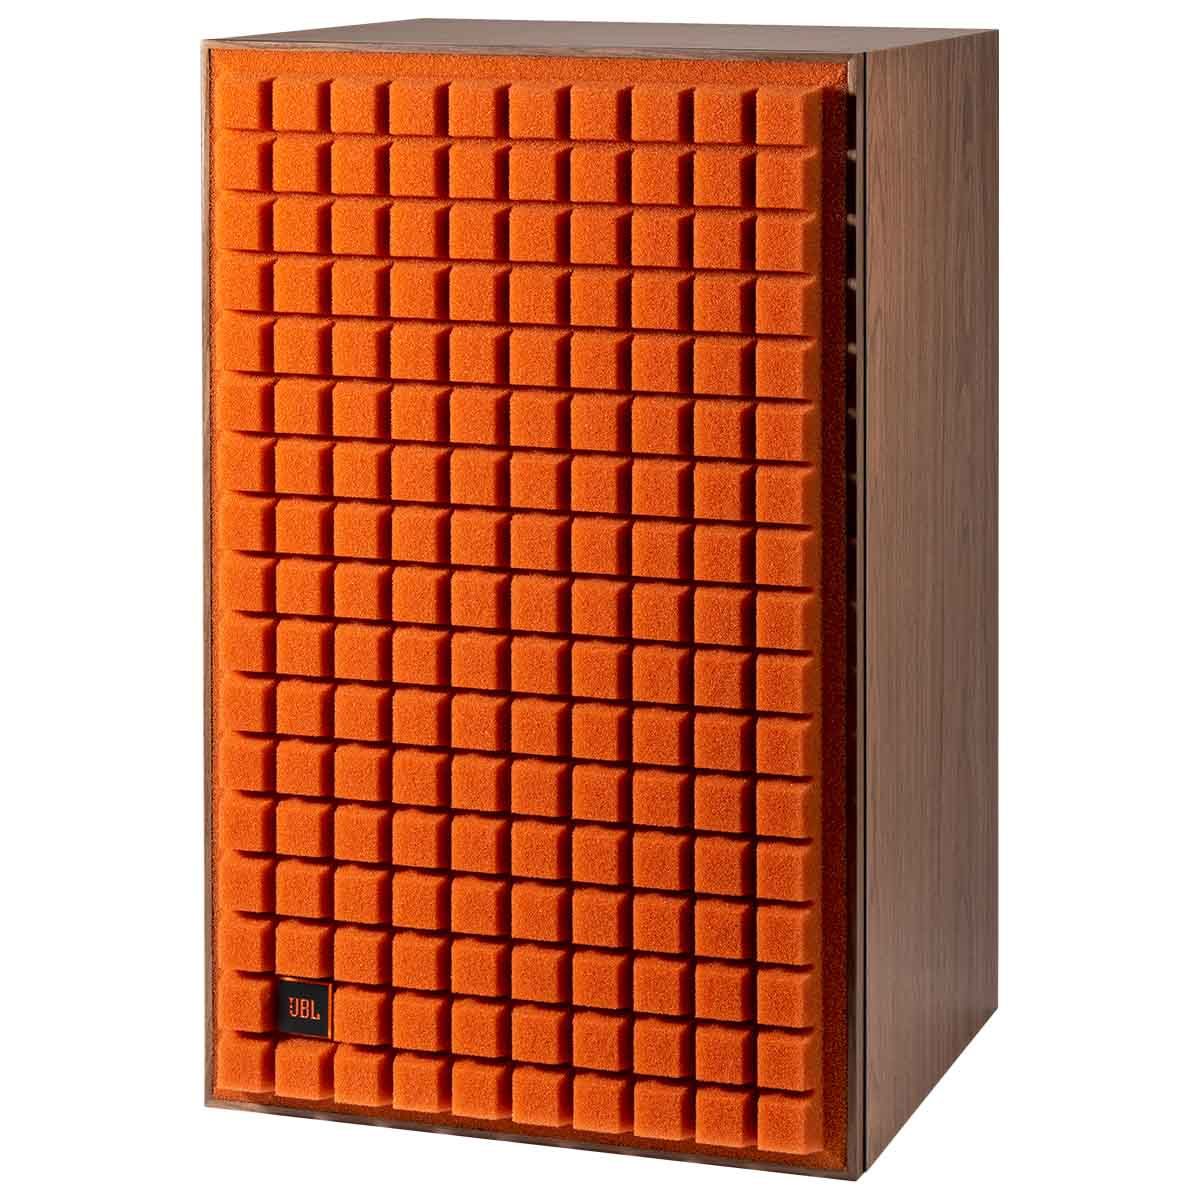 JBL L100 Classic MKII Loudspeaker Orange angled right front view with grille